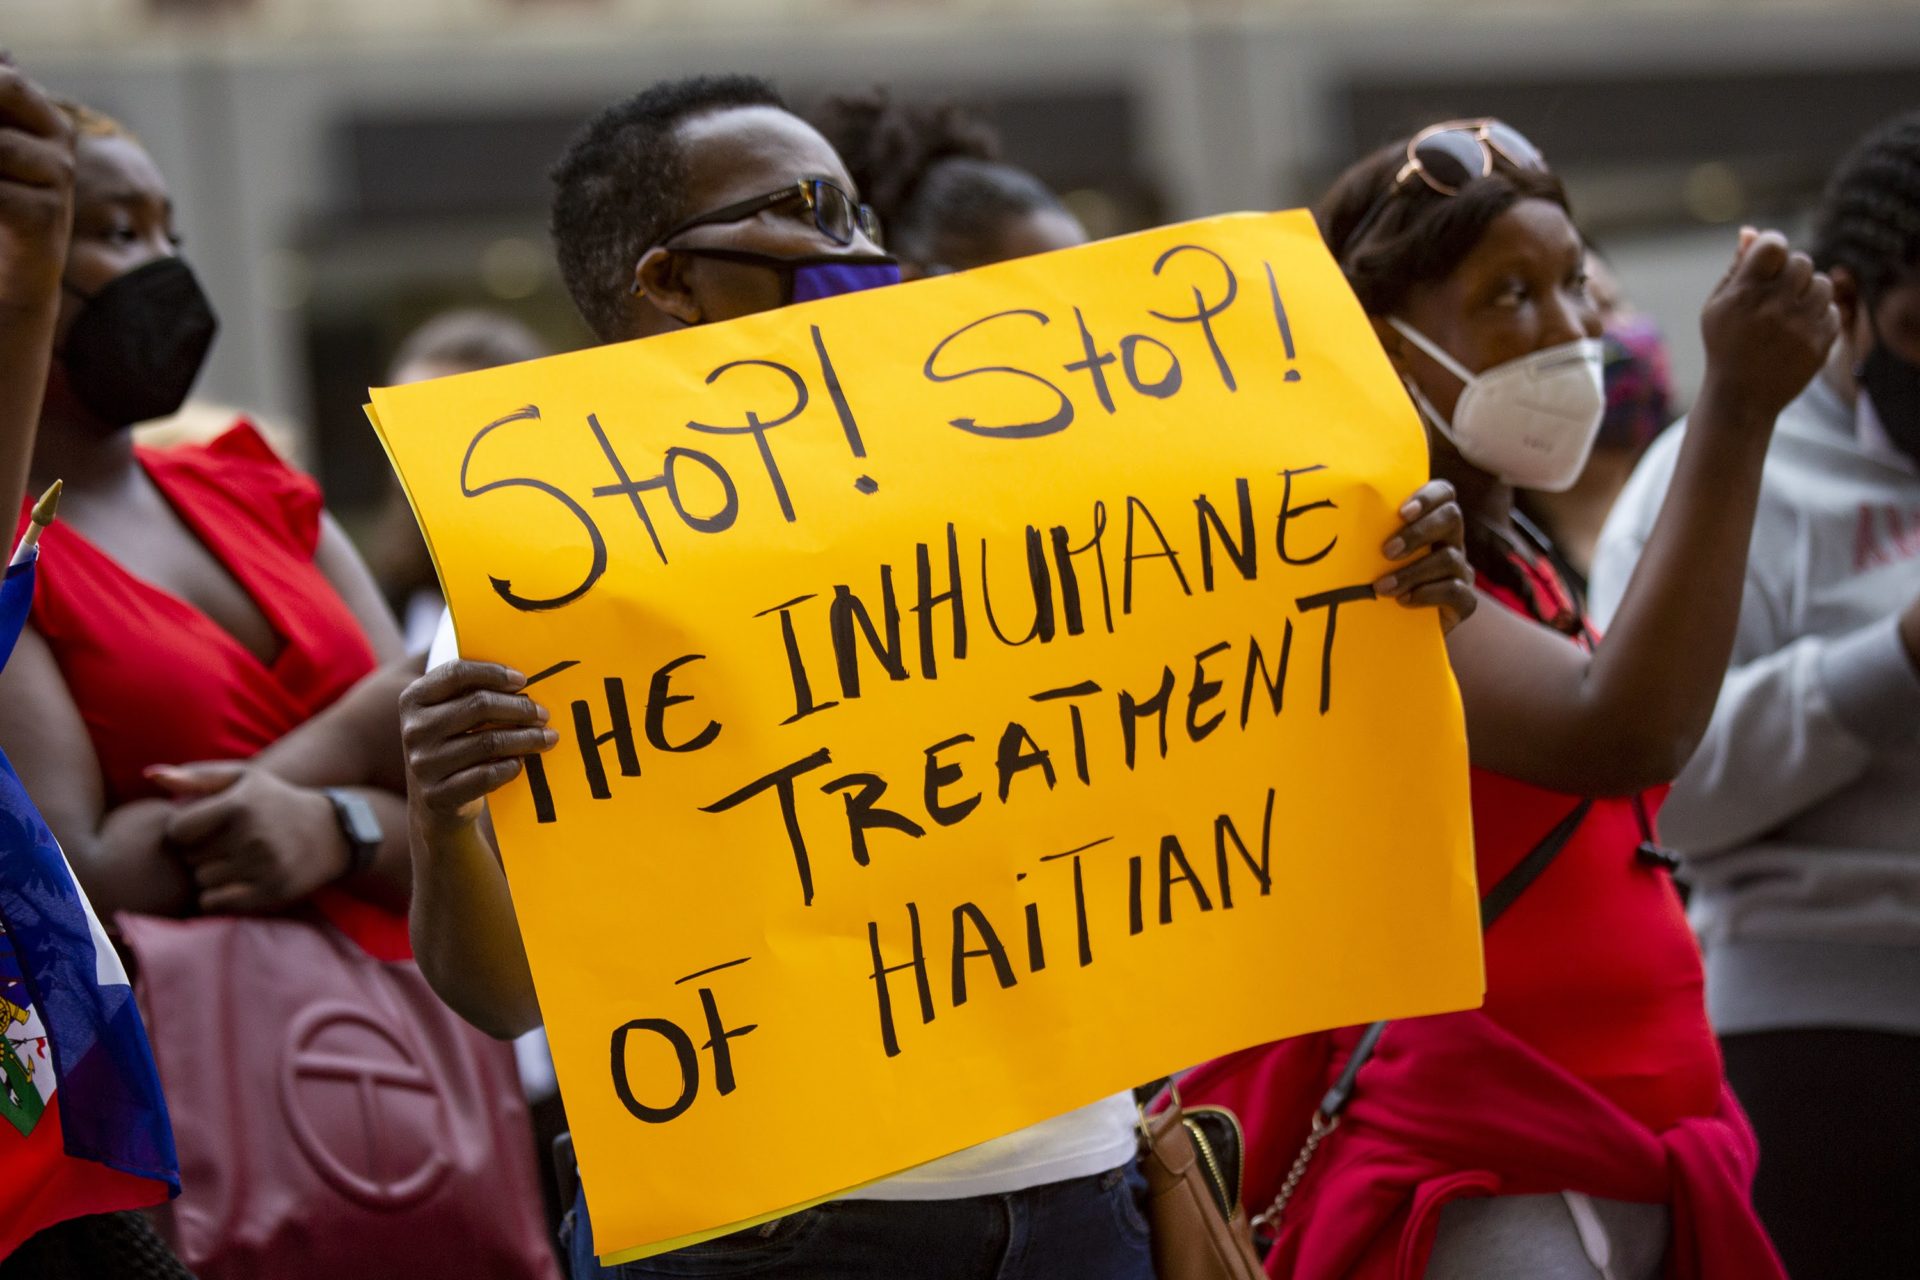 (English) We call on the U.S. government to immediately halt expulsions of Haitians.